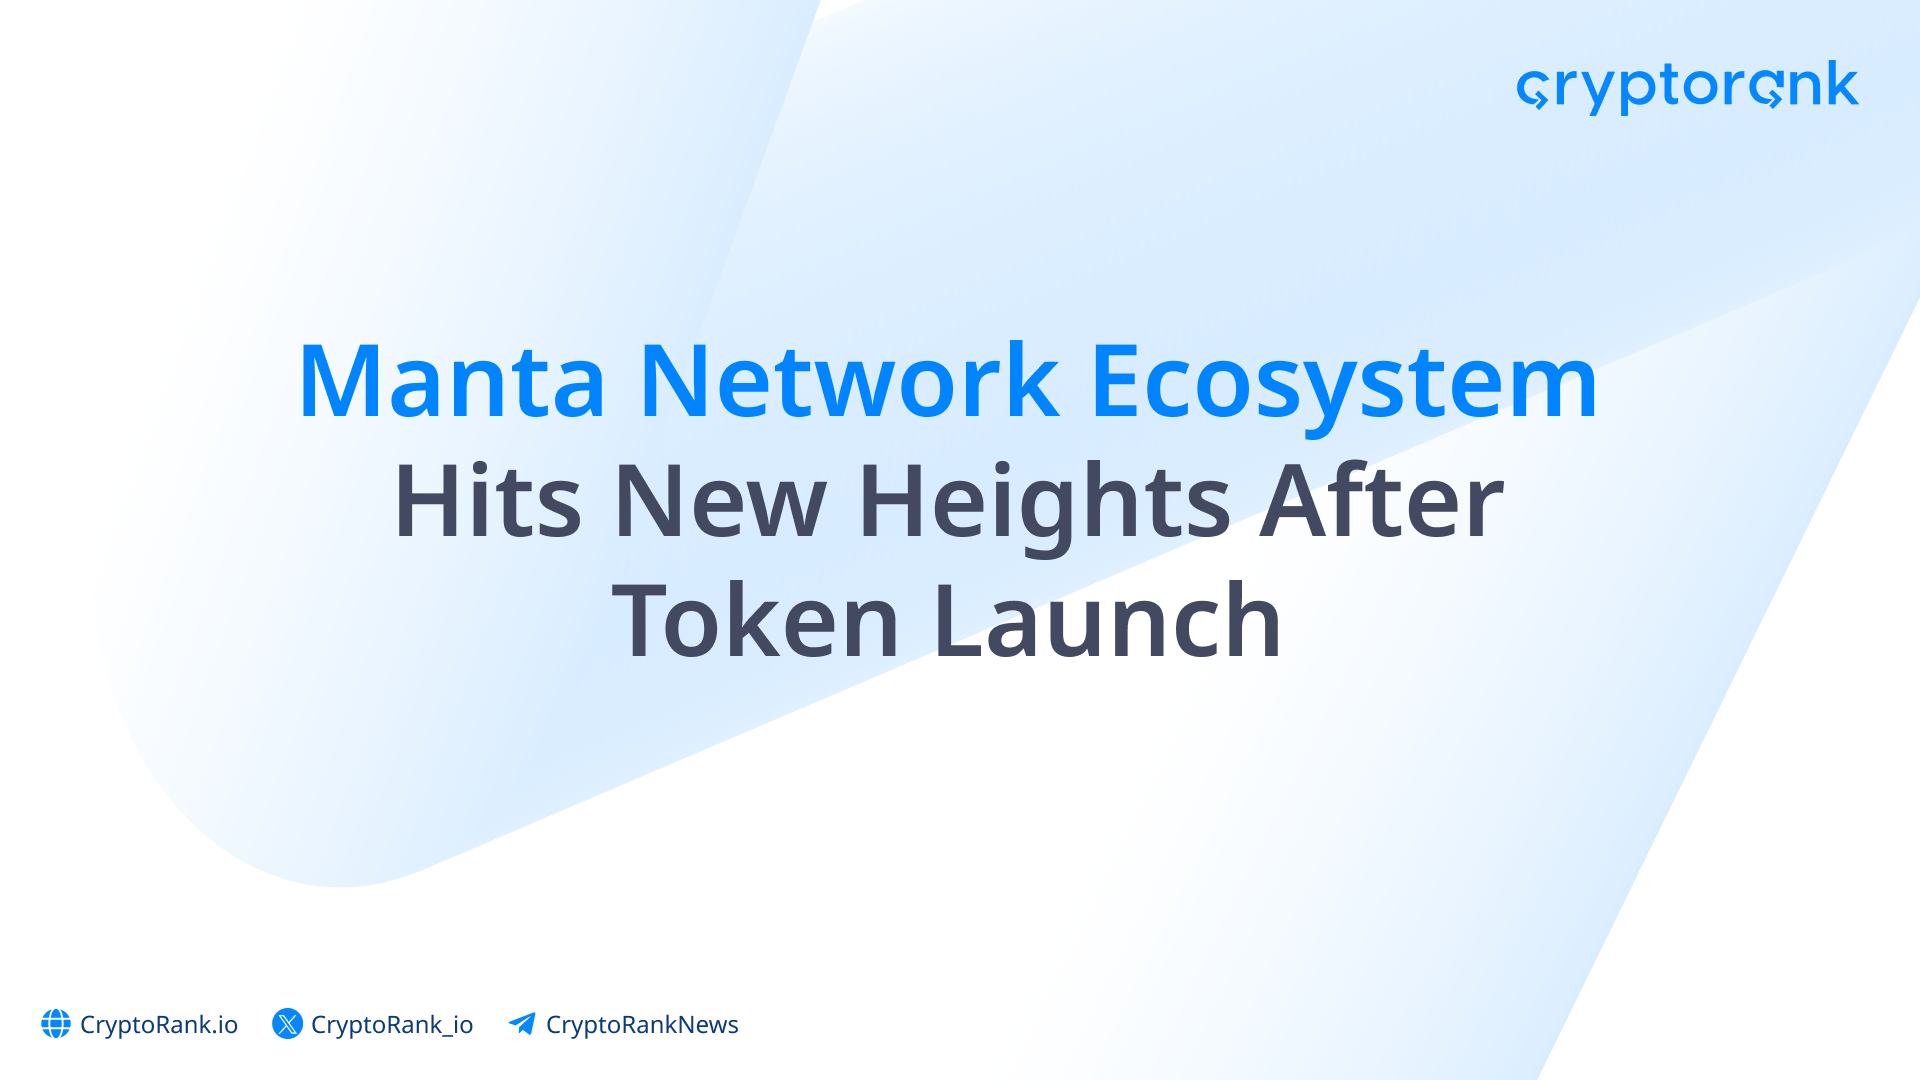 Manta Network Ecosystem Hits New Heights After Token Launch